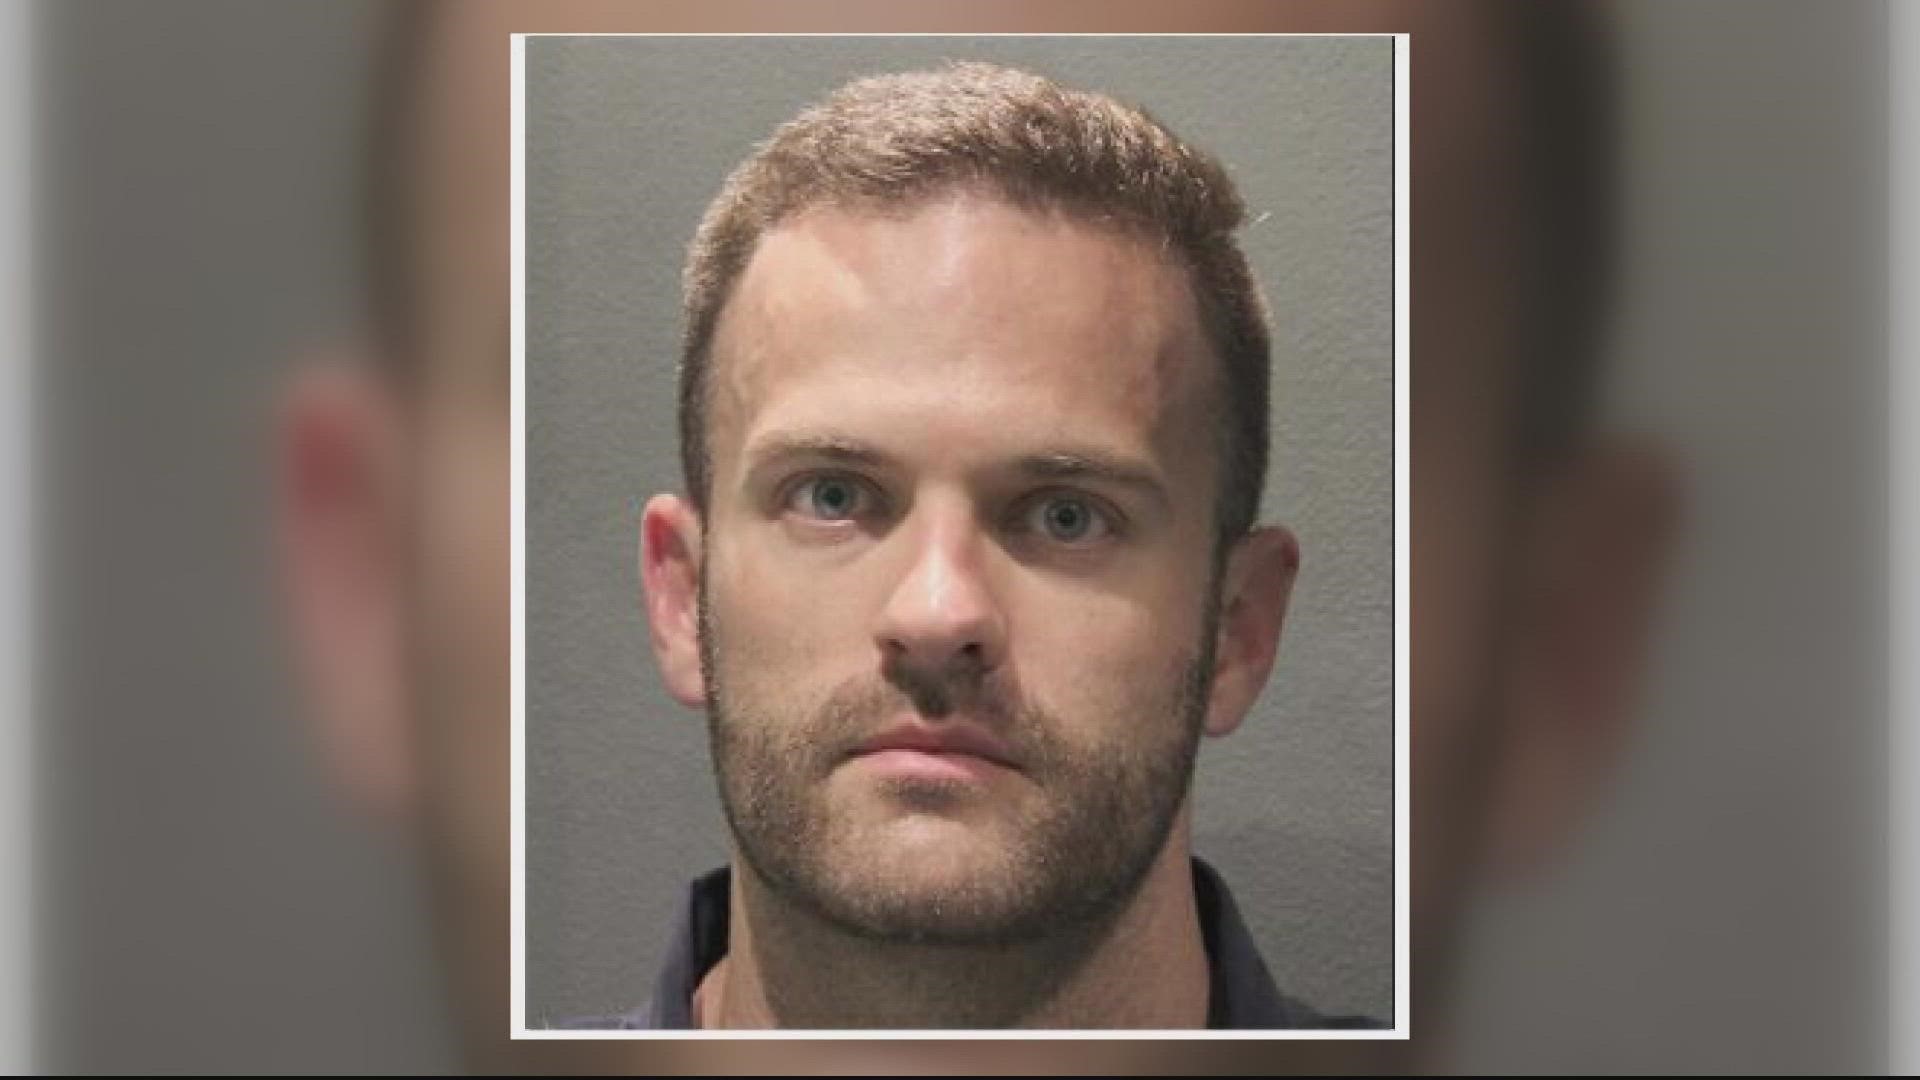 An Arlington County Police Officer is facing charges for allegedly assaulting a woman after leaving a nightclub. William Hahn is currently being held without bond.